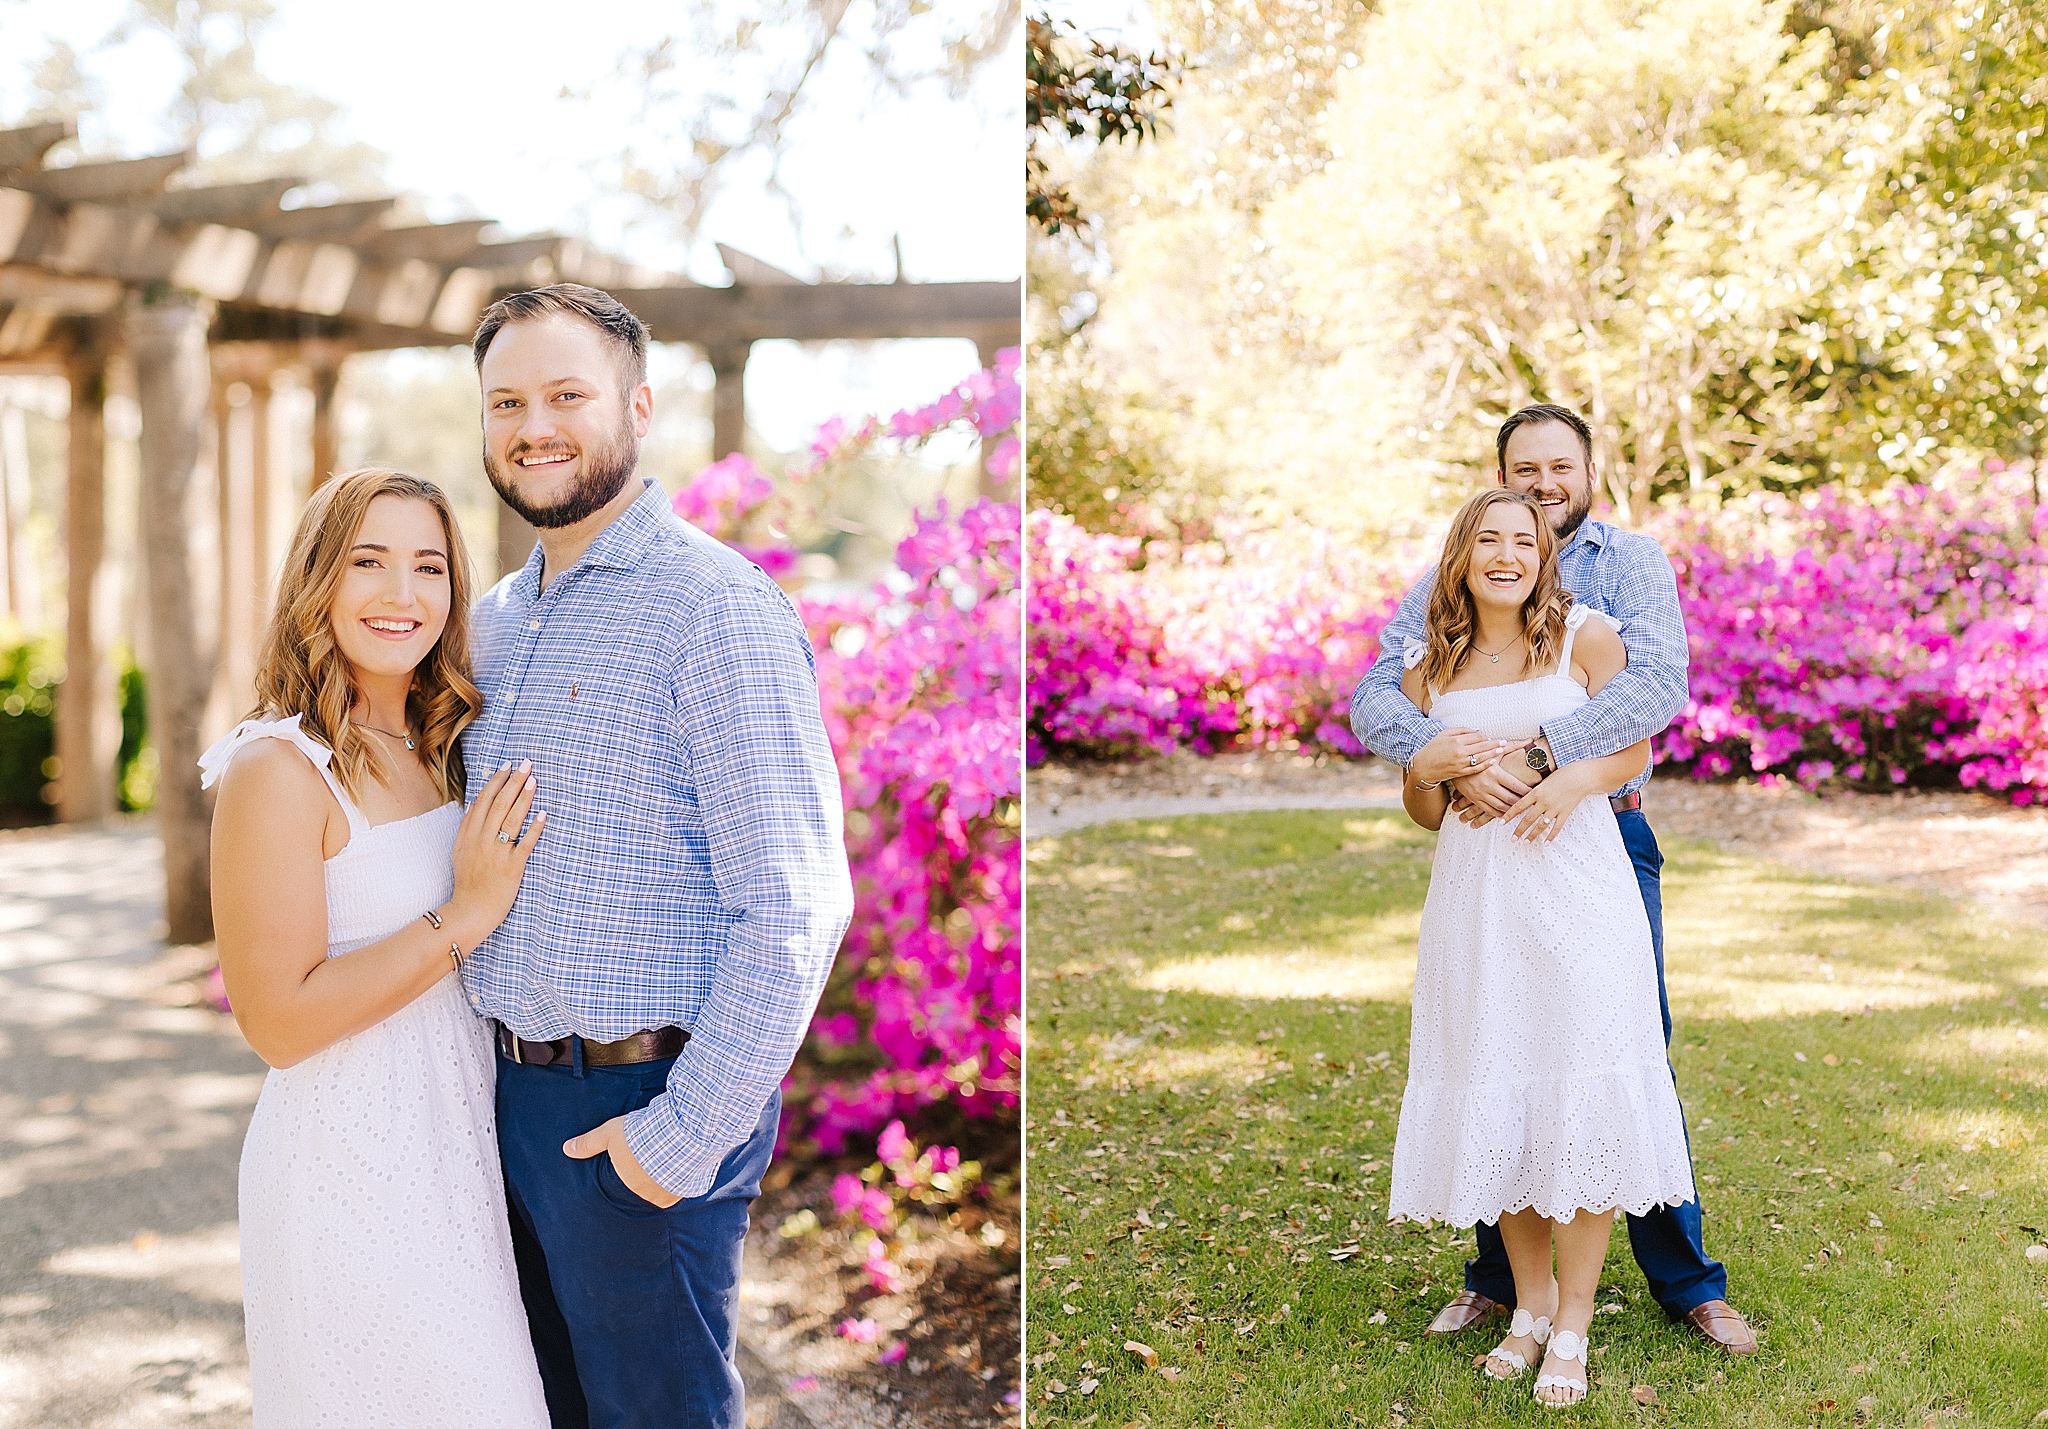 Wilmington engagement session in the gardens with pink flowers